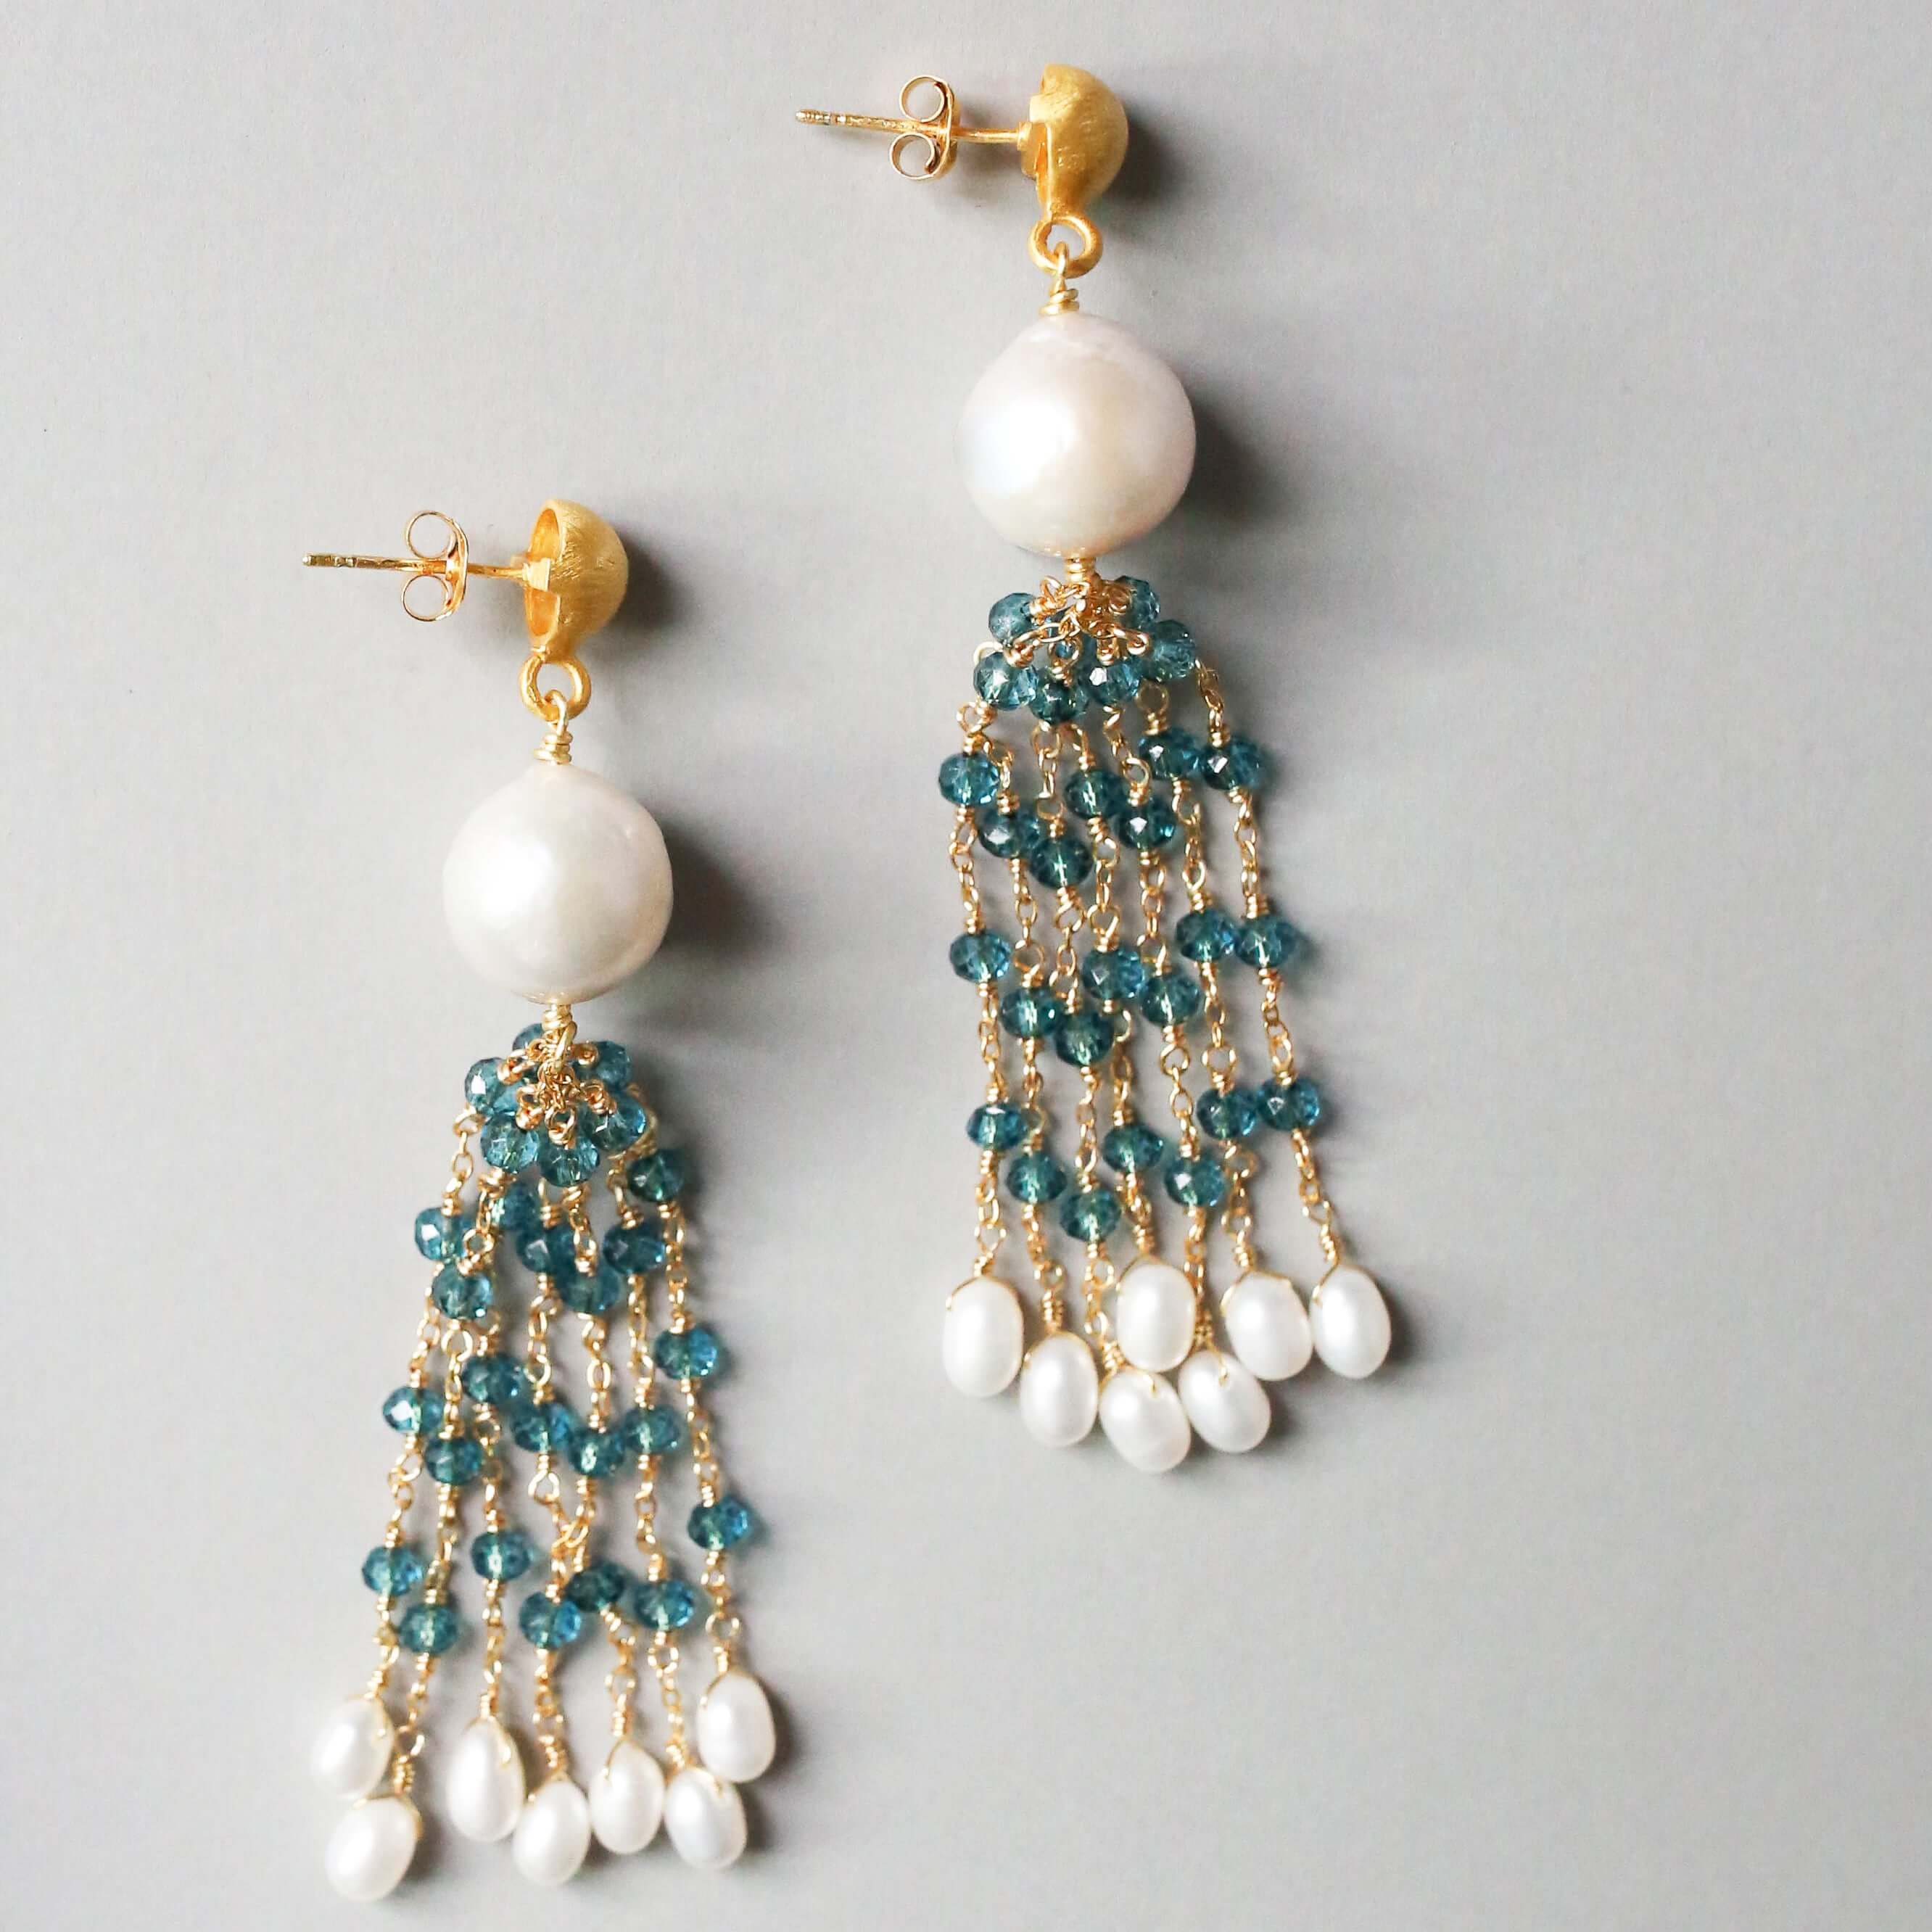 Freshwater baroque pearls, London Blue Quartz and bead pearls Tassel Earrings in Gold plated Italian Silver